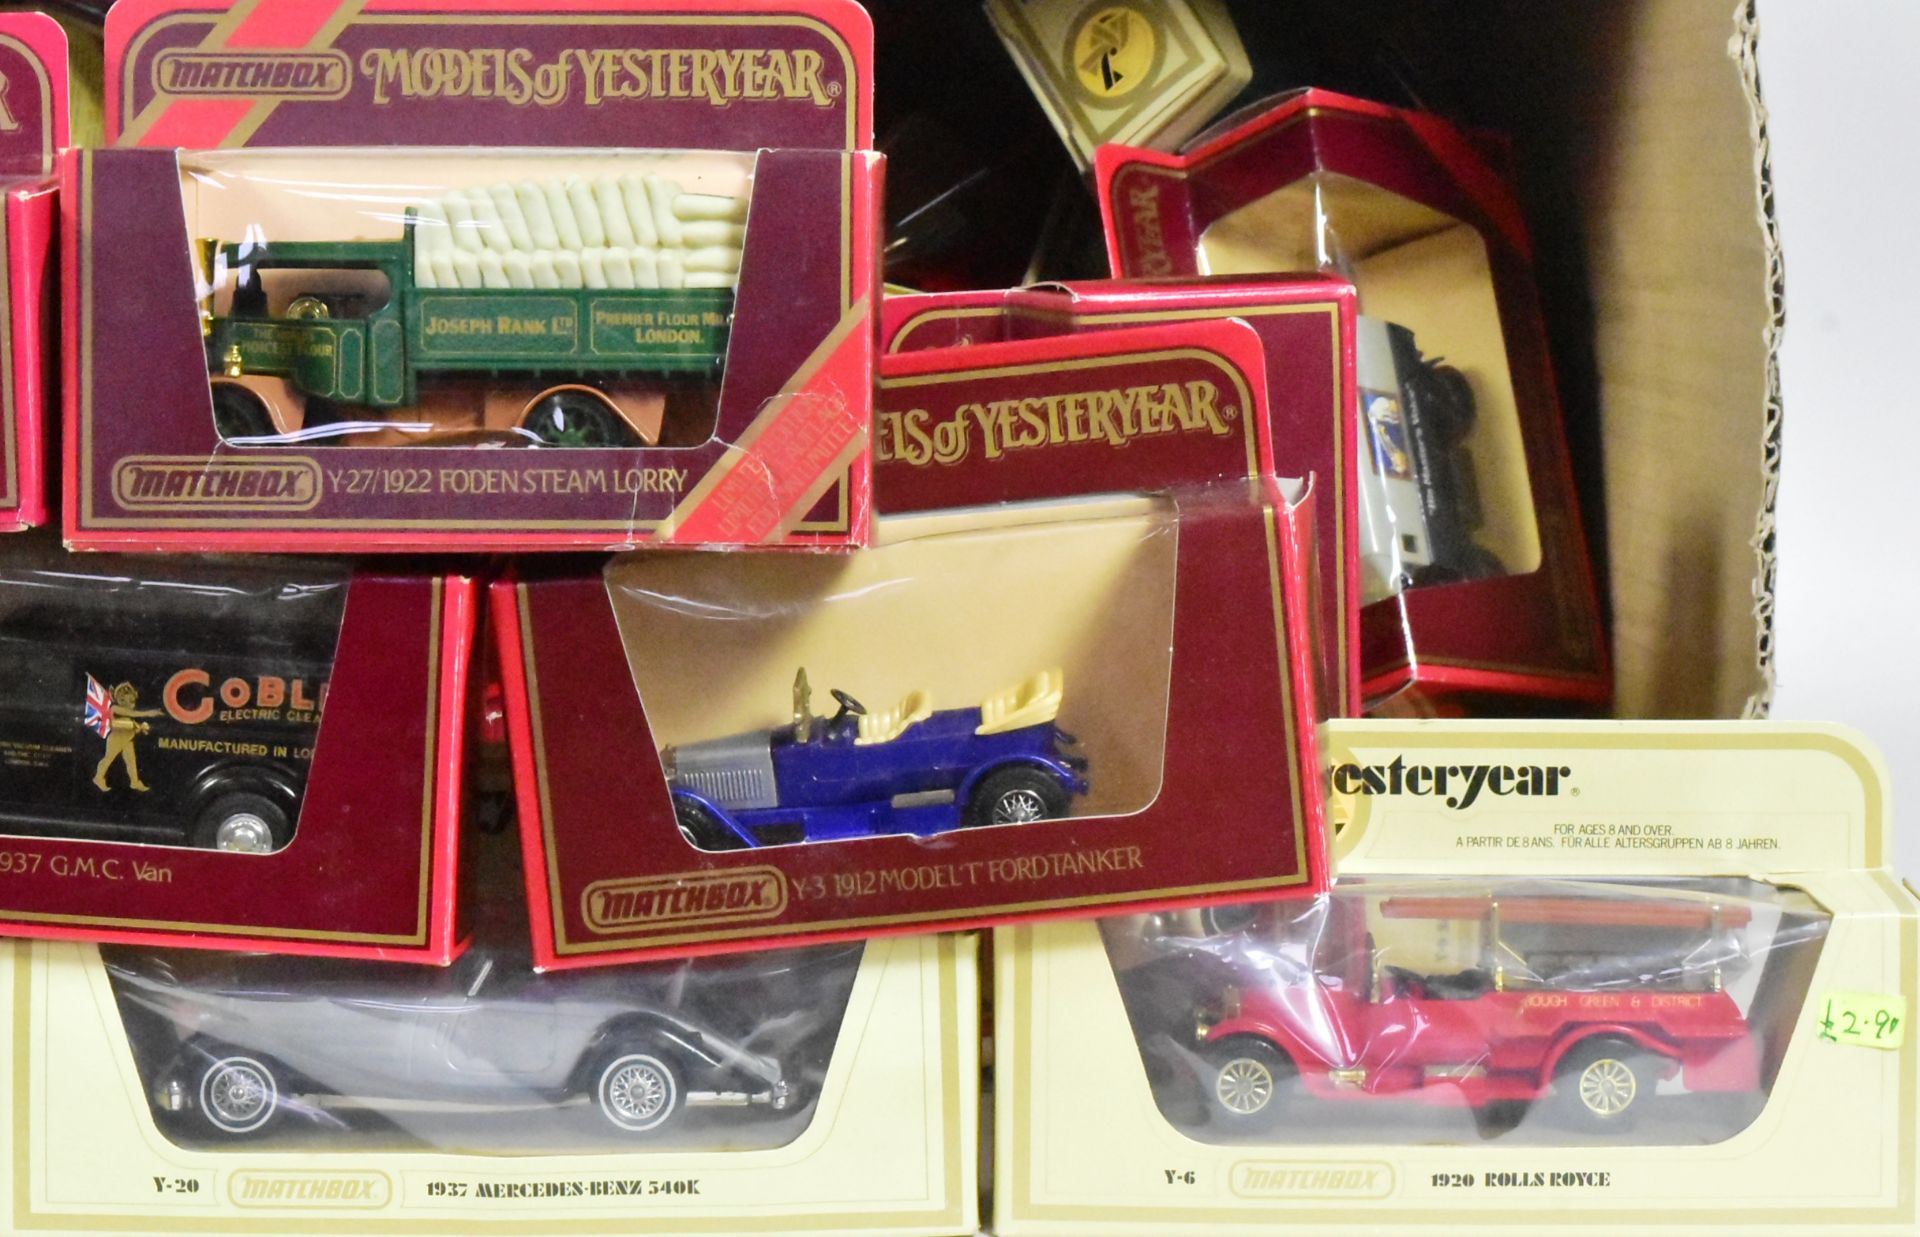 DIECAST - X50 MATCHBOX MODELS OF YESTERYEAR - Image 3 of 4